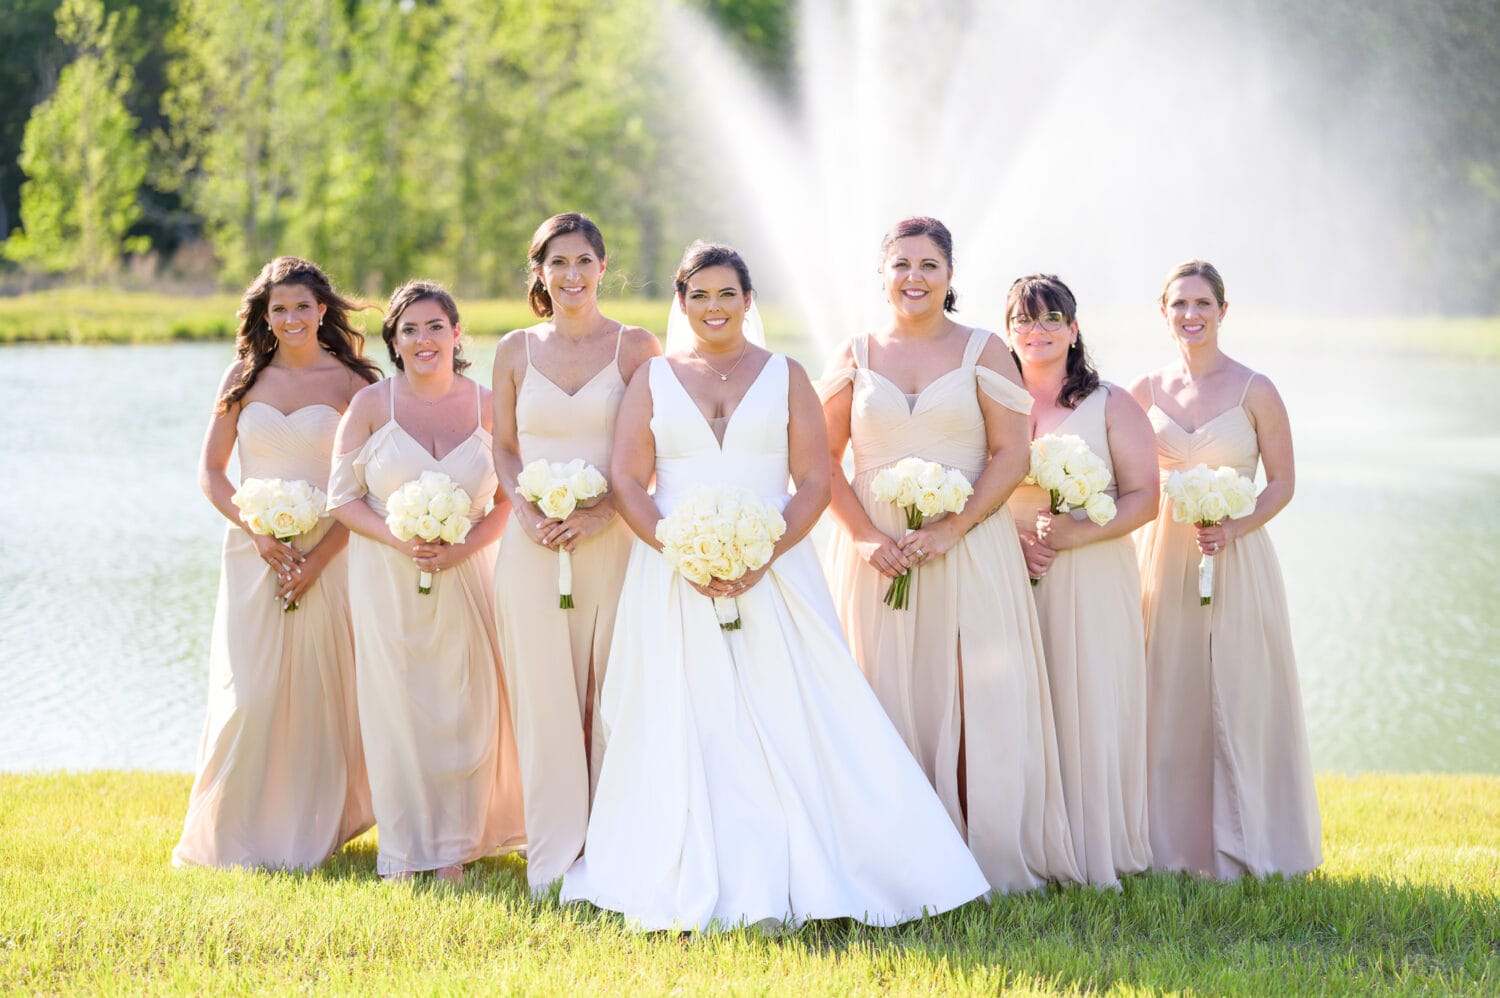 Pictures with the bridesmaids - The Venue at White Oaks Farm